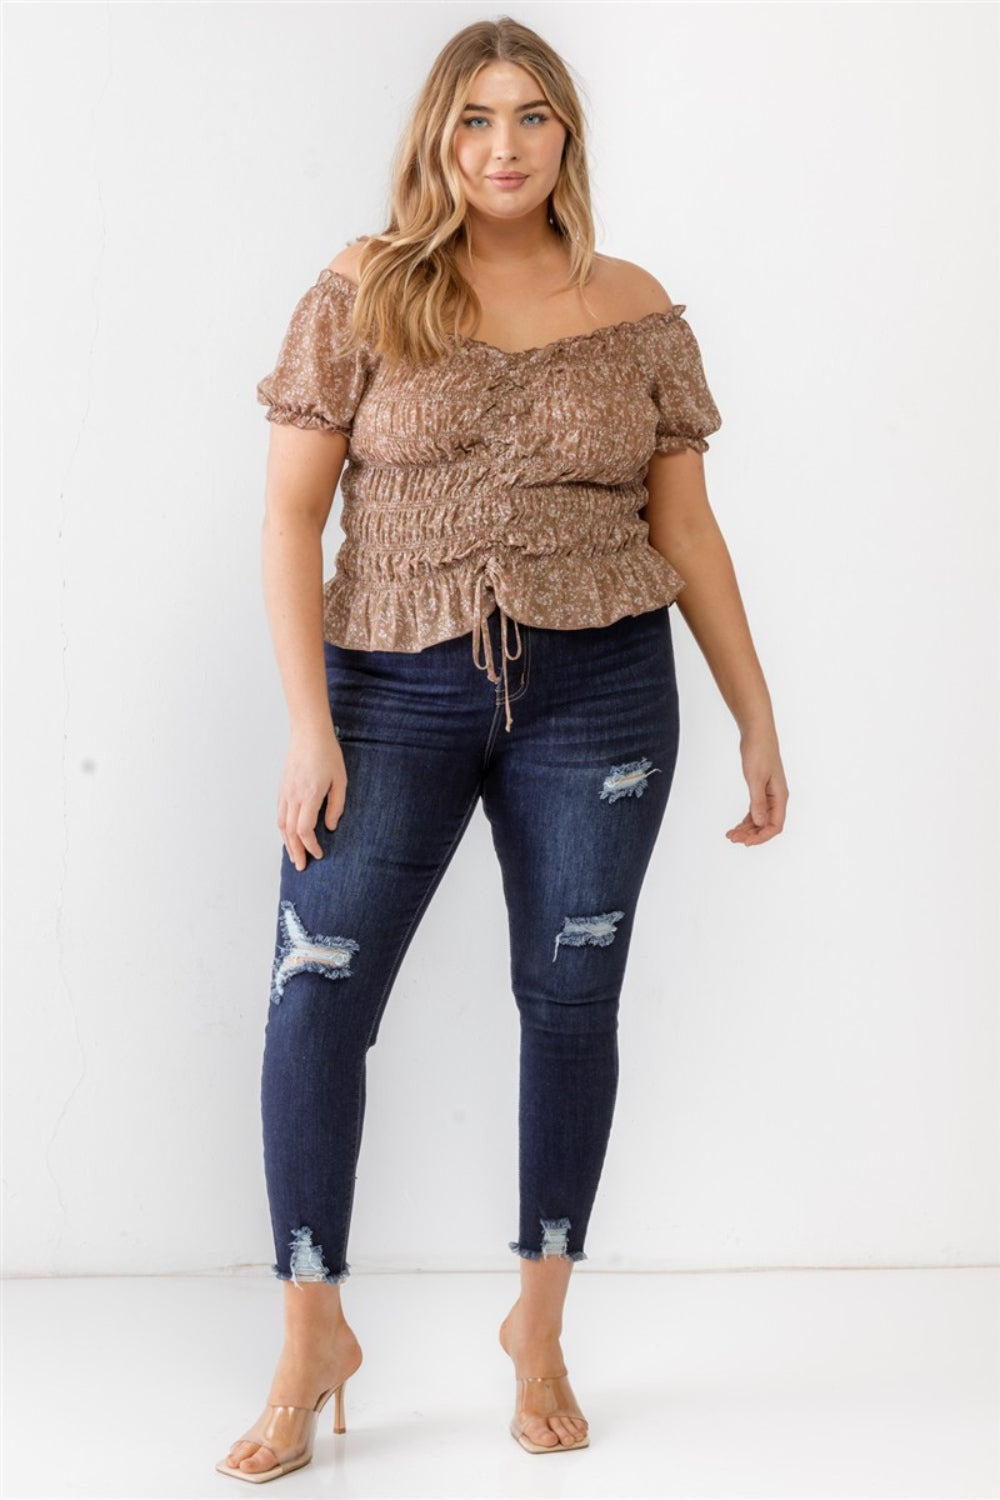 ZENOBIA PLUS SIZE FRILL RUCHED OFF THE SHOULDER SHORT SLEEVE BLOUSE